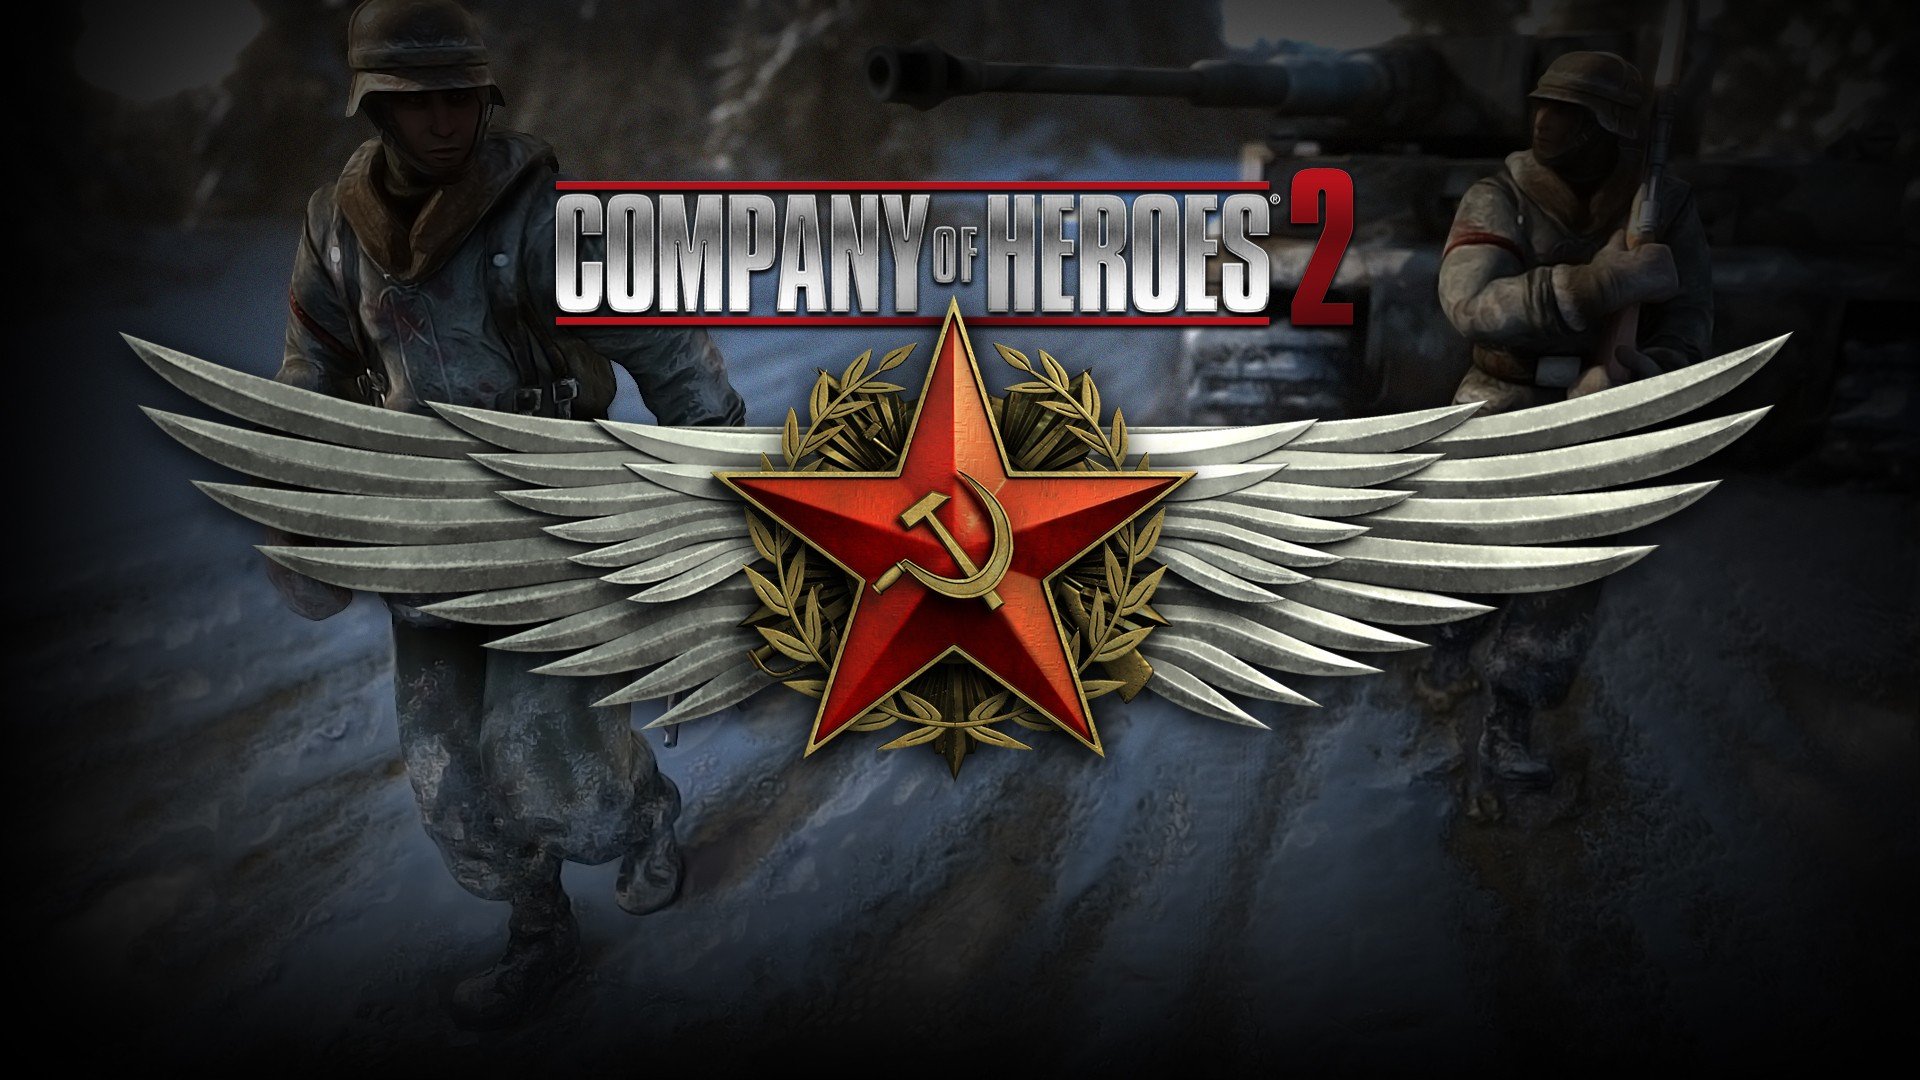 company of heroes, Strategy, Mmo, Onlime, Military, War, Shooter, Action, Company, Heroes, Battle,  71 Wallpaper